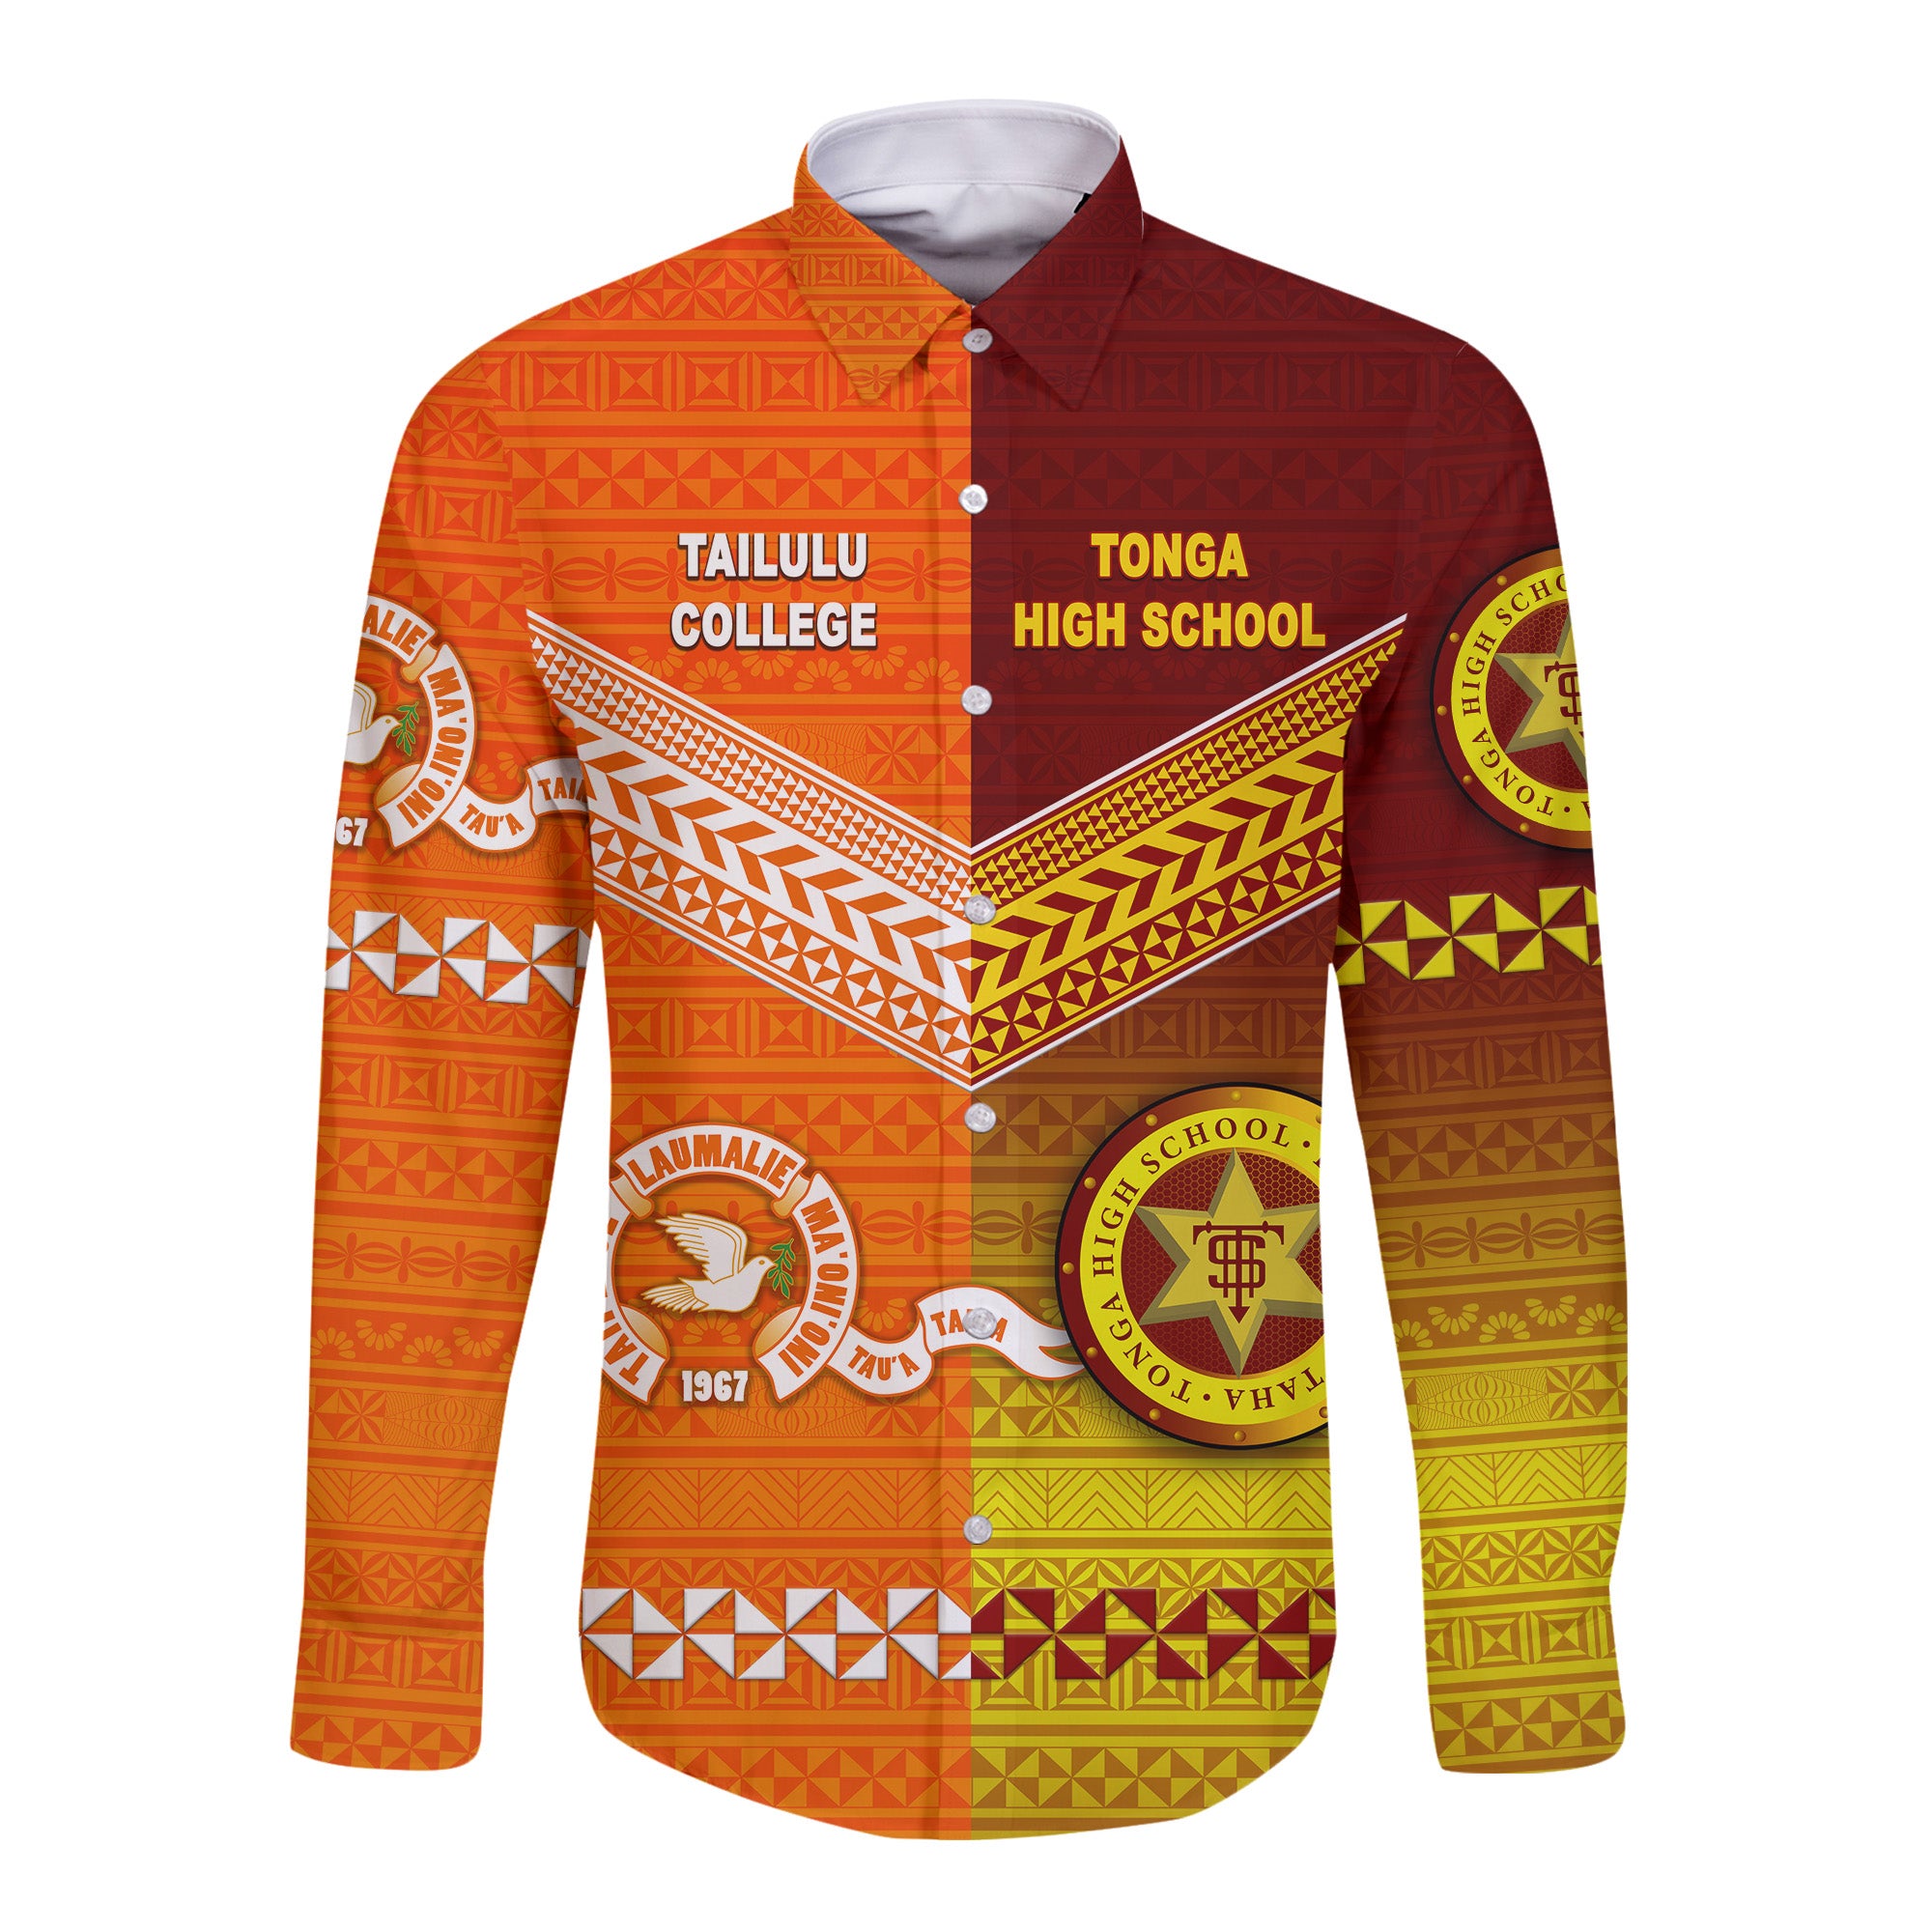 (Custom Personalised) Tonga Tailulu College And Tonga High School Hawaii Long Sleeve Button Sleeve Together Unique Style LT8 - Polynesian Pride